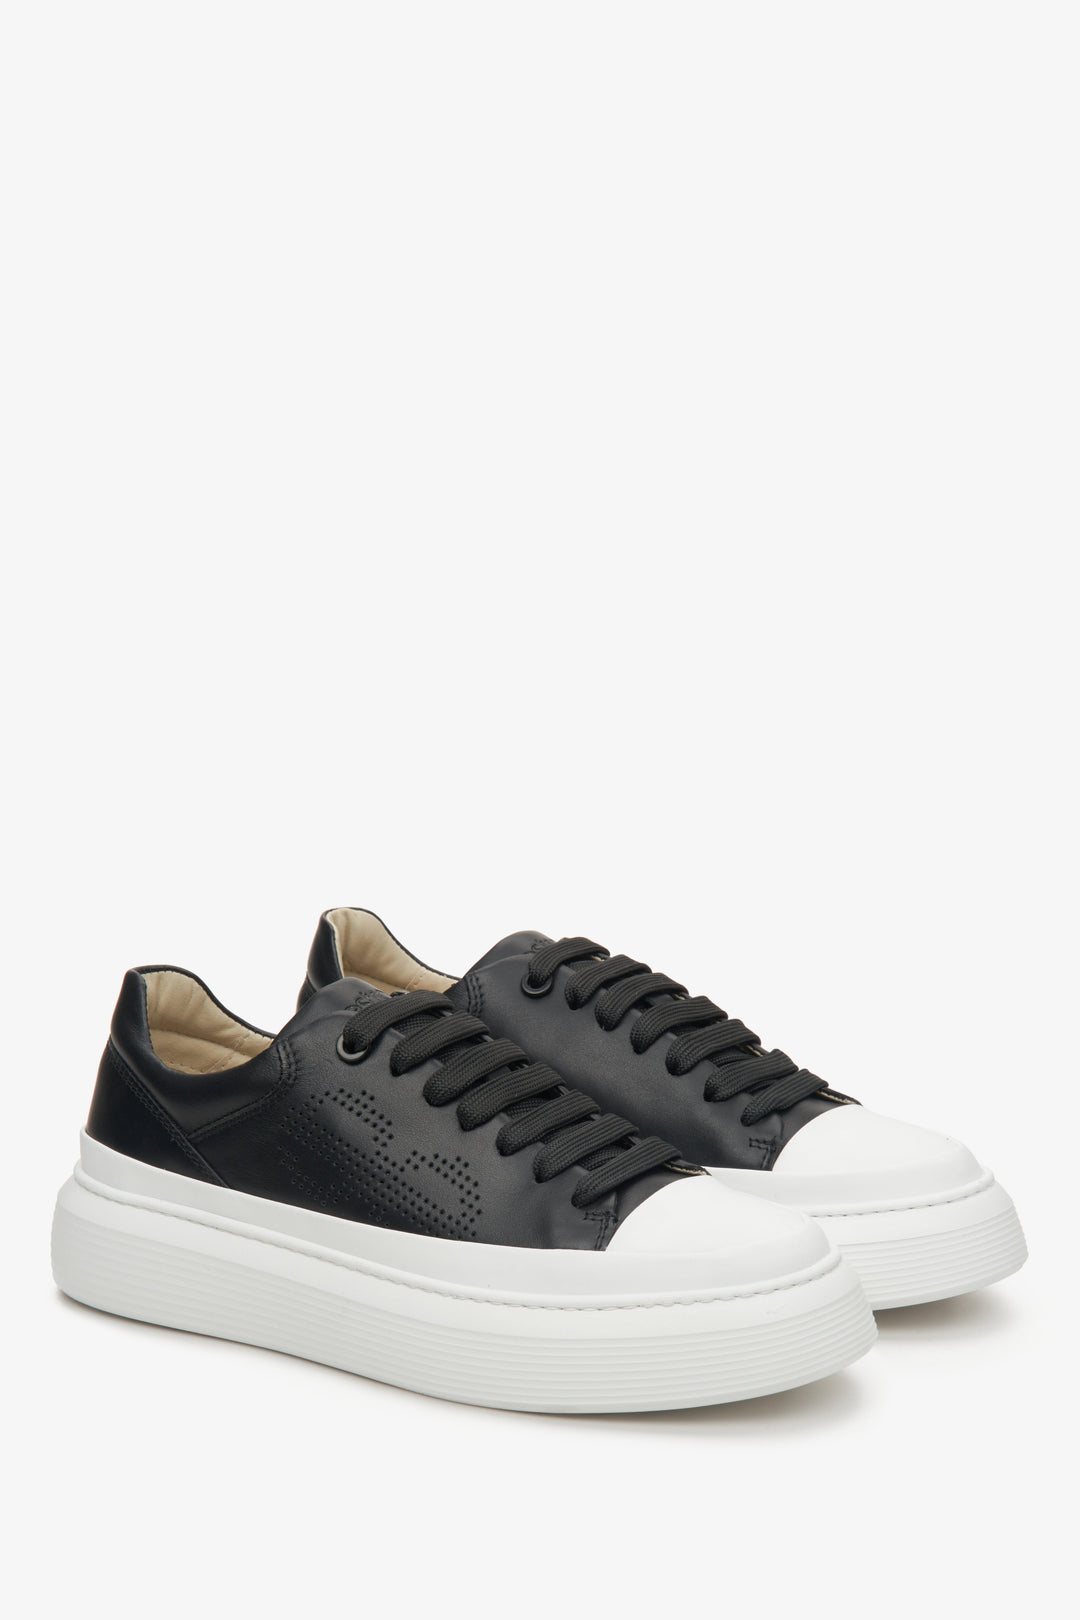 Black leather Estro women's sneakers for spring - presentation of the the model on the side.